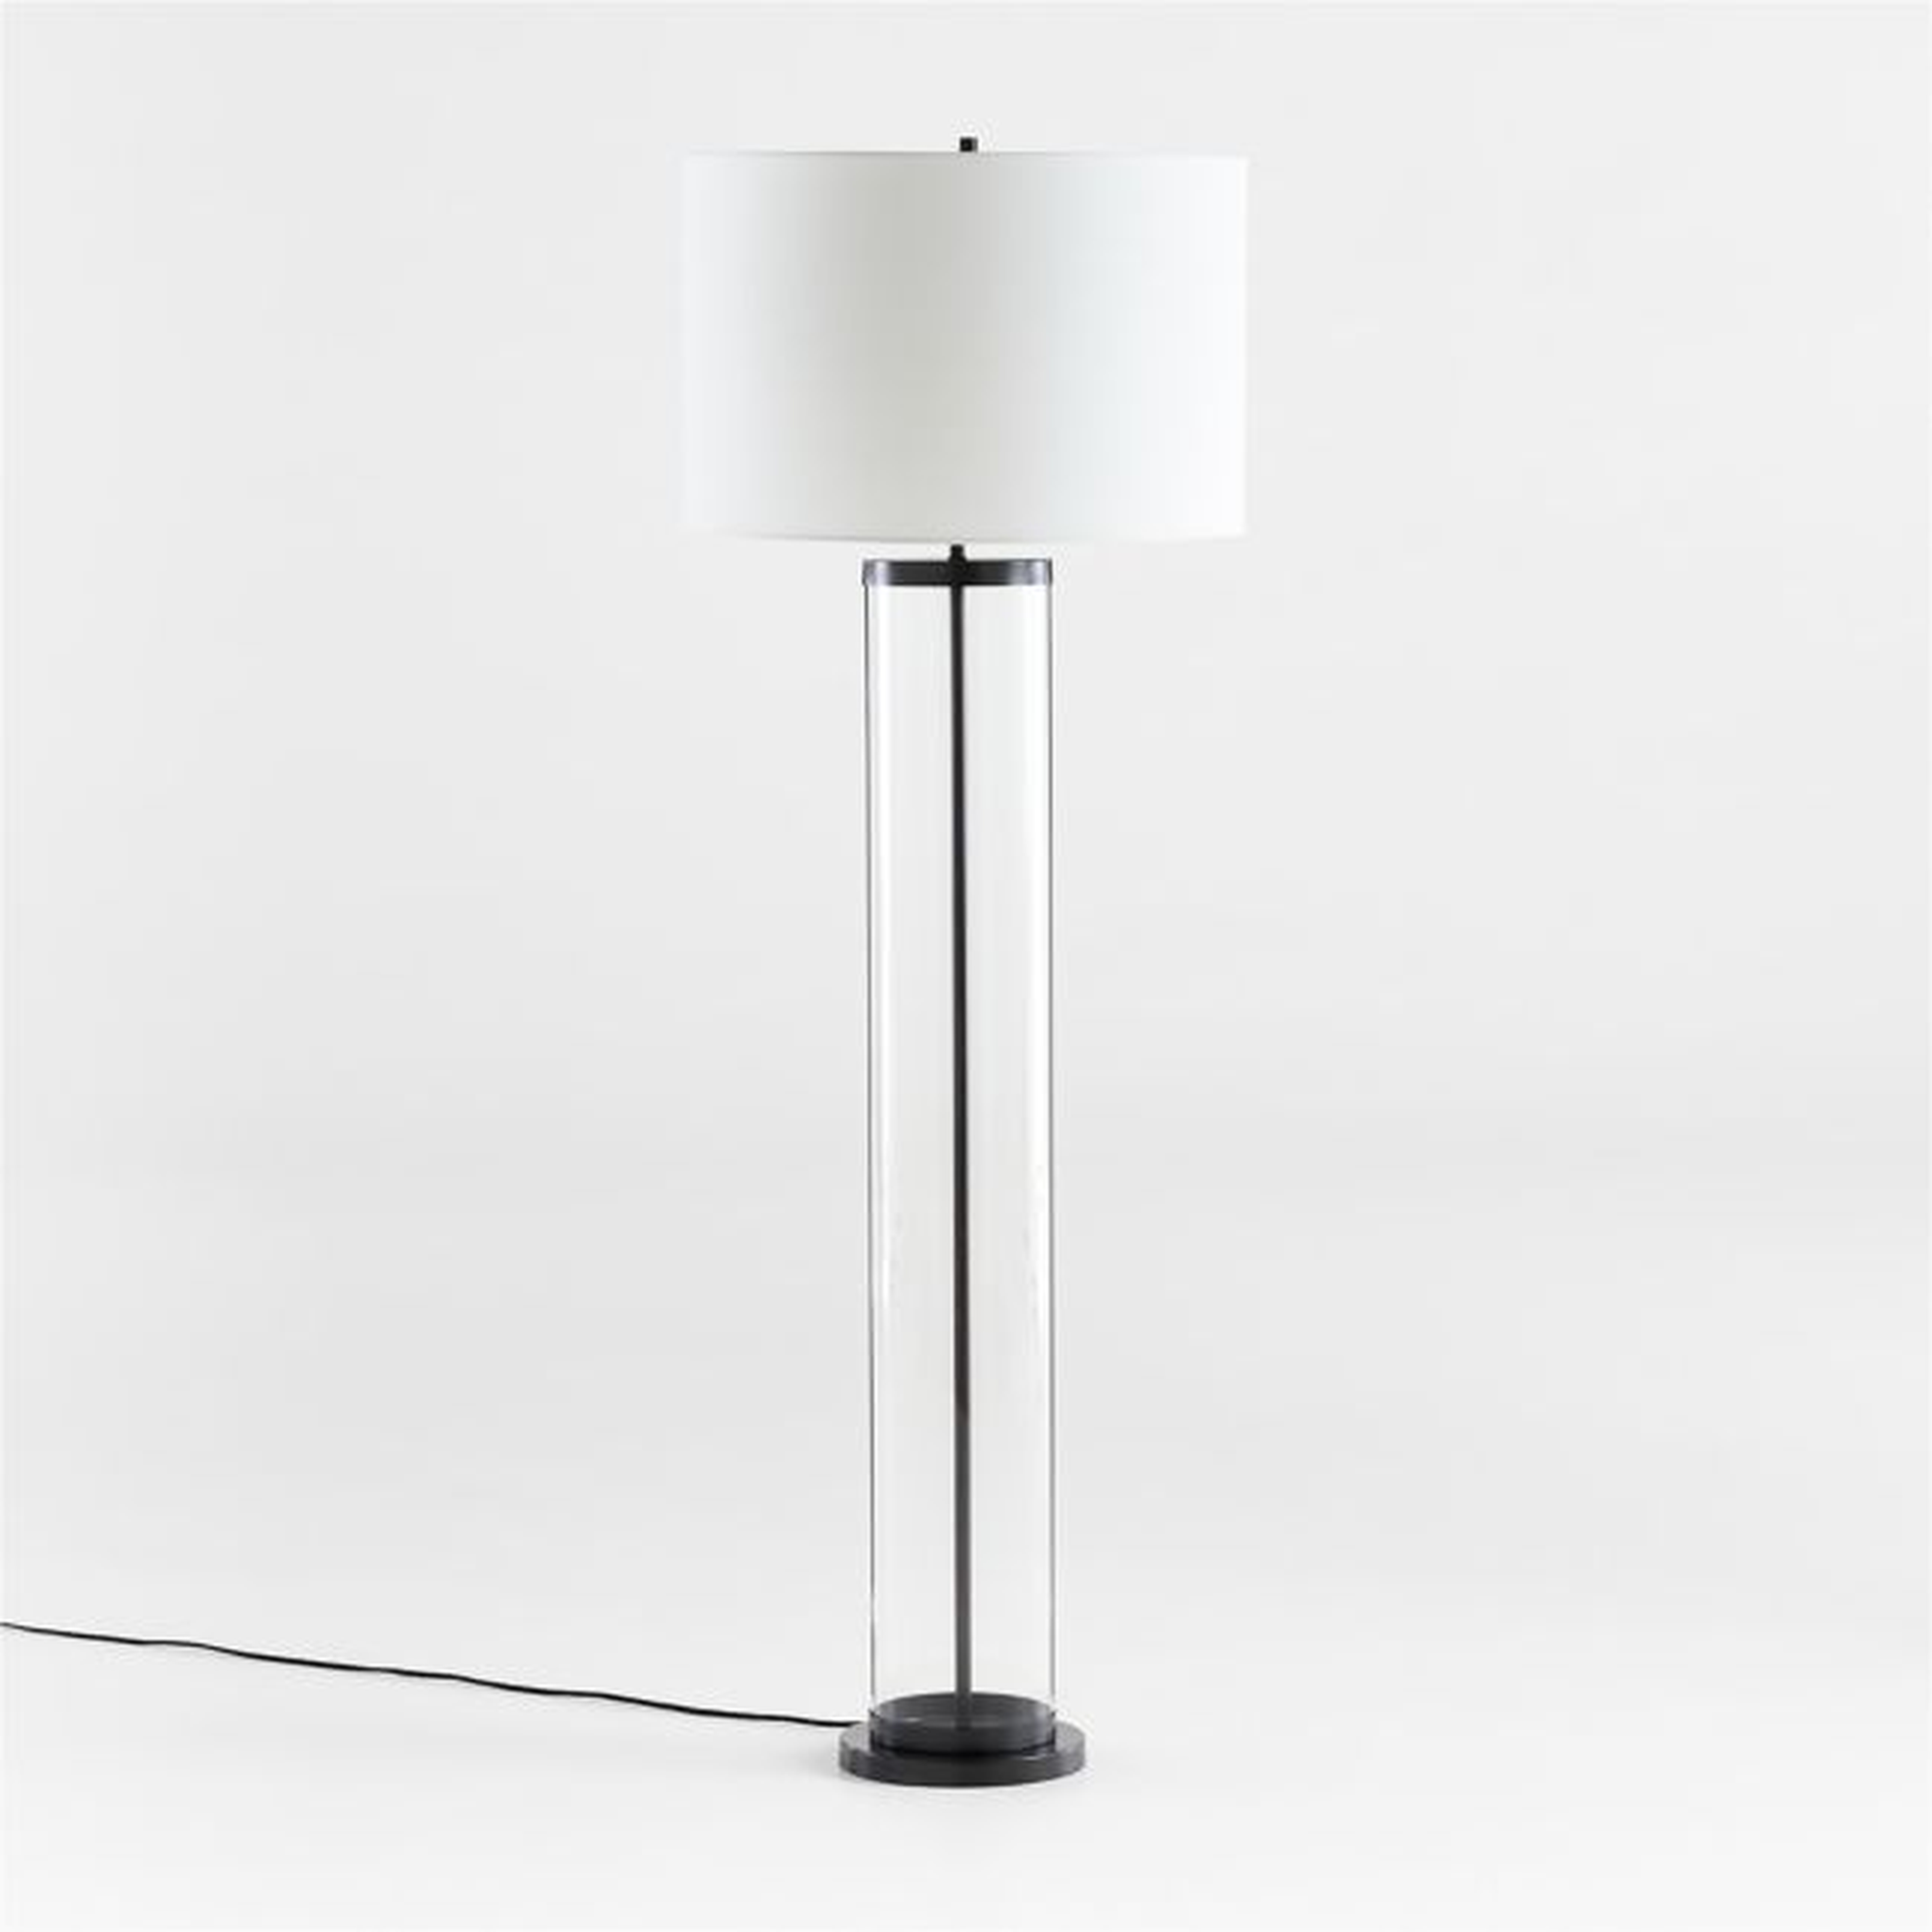 Promenade Black Floor Lamp with White Shade - Crate and Barrel